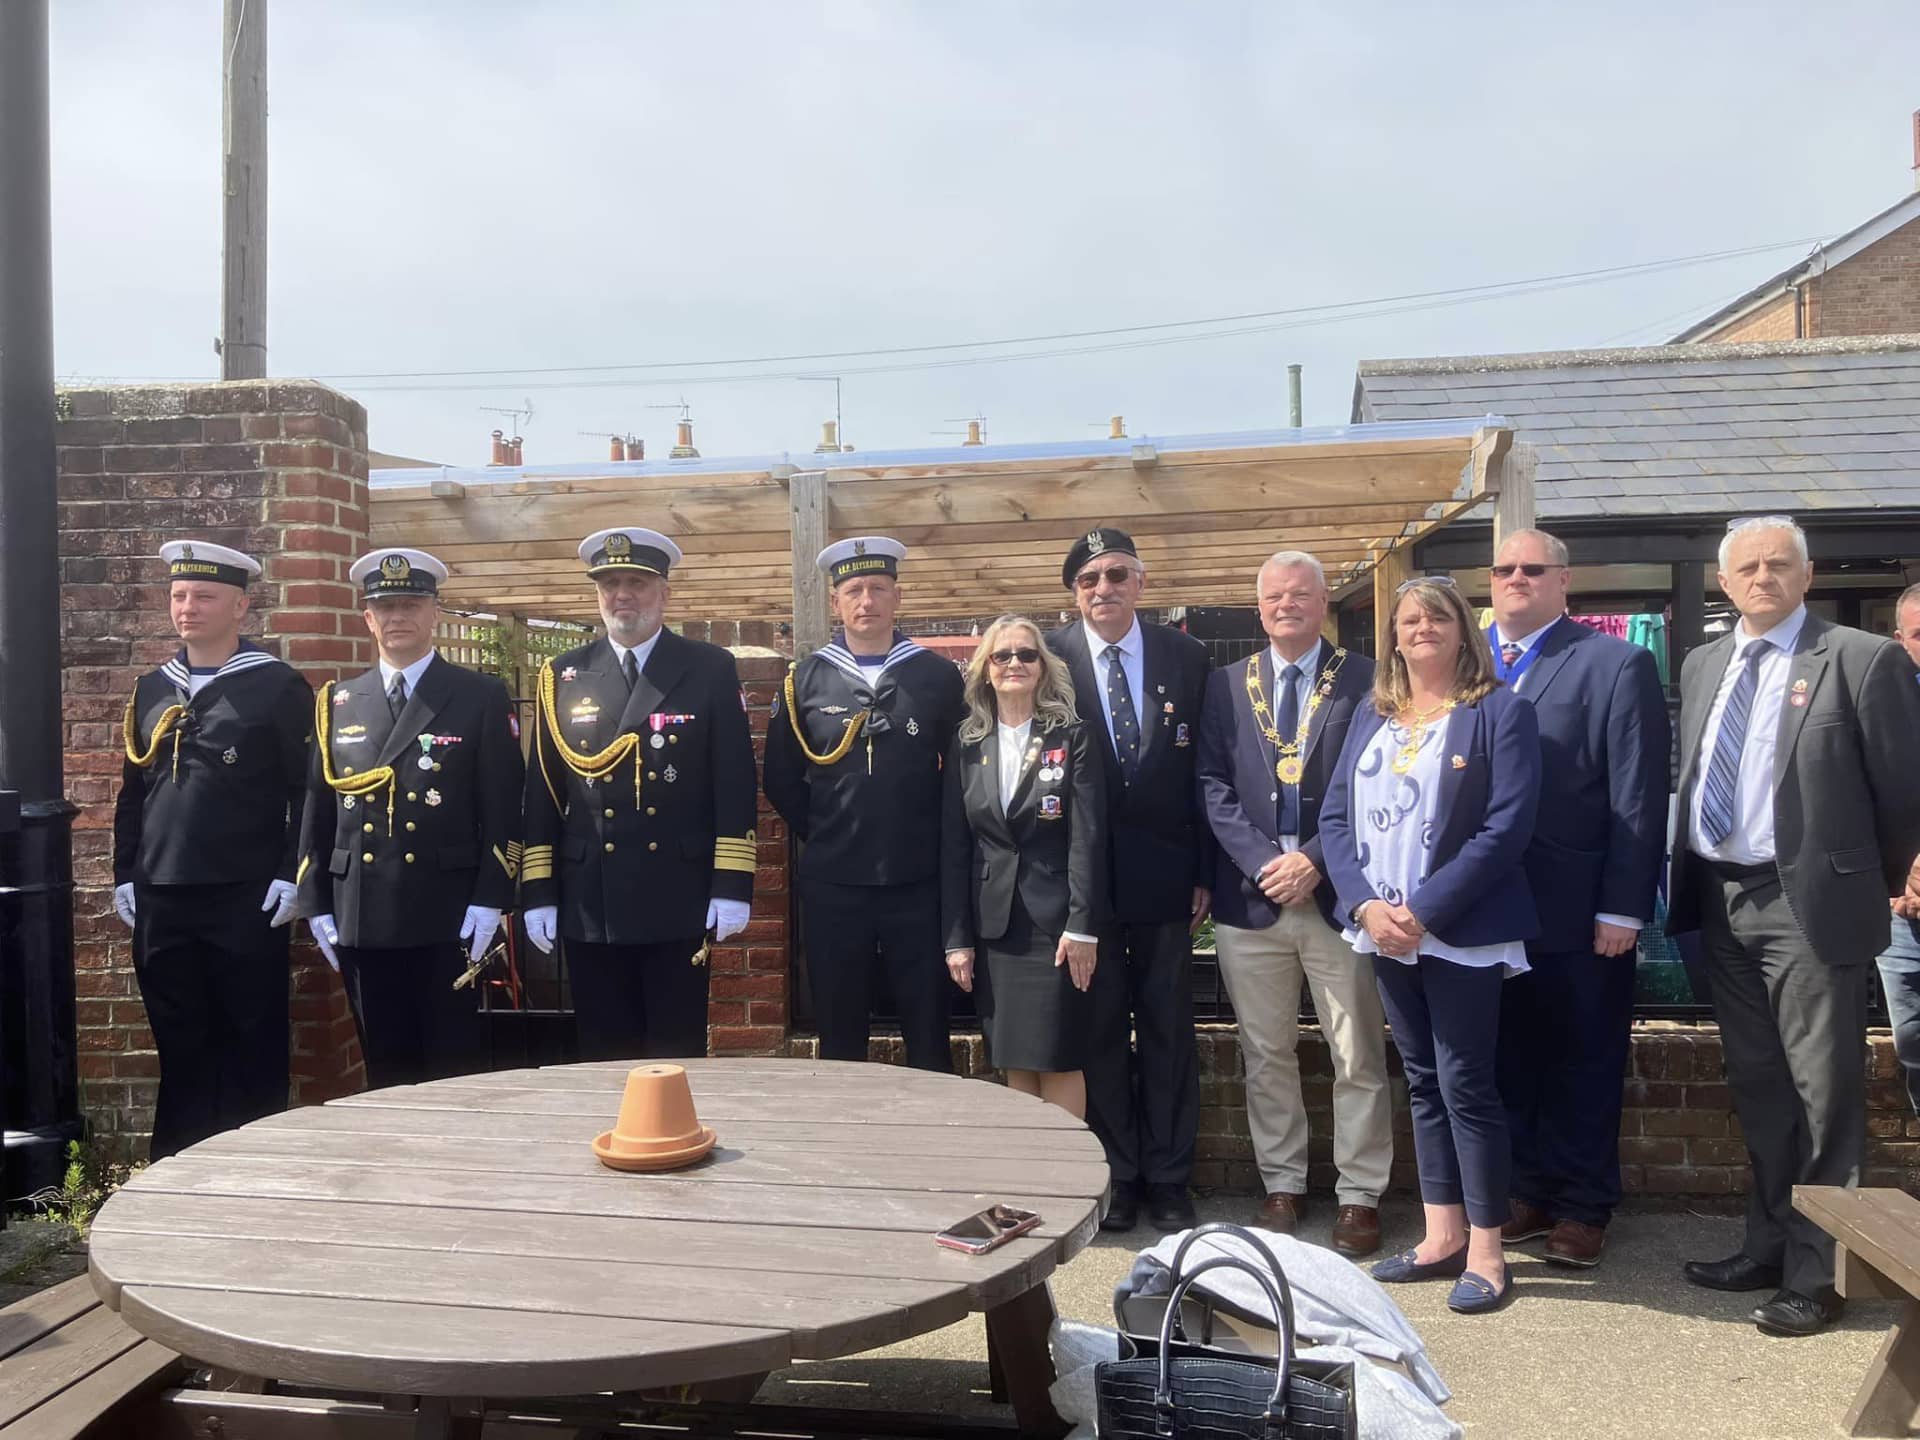 Polish/Anglo Commemoration for Captain Wojciech Francki and the Crew of ORP Blyskawica - taken by Cllr Karl Love